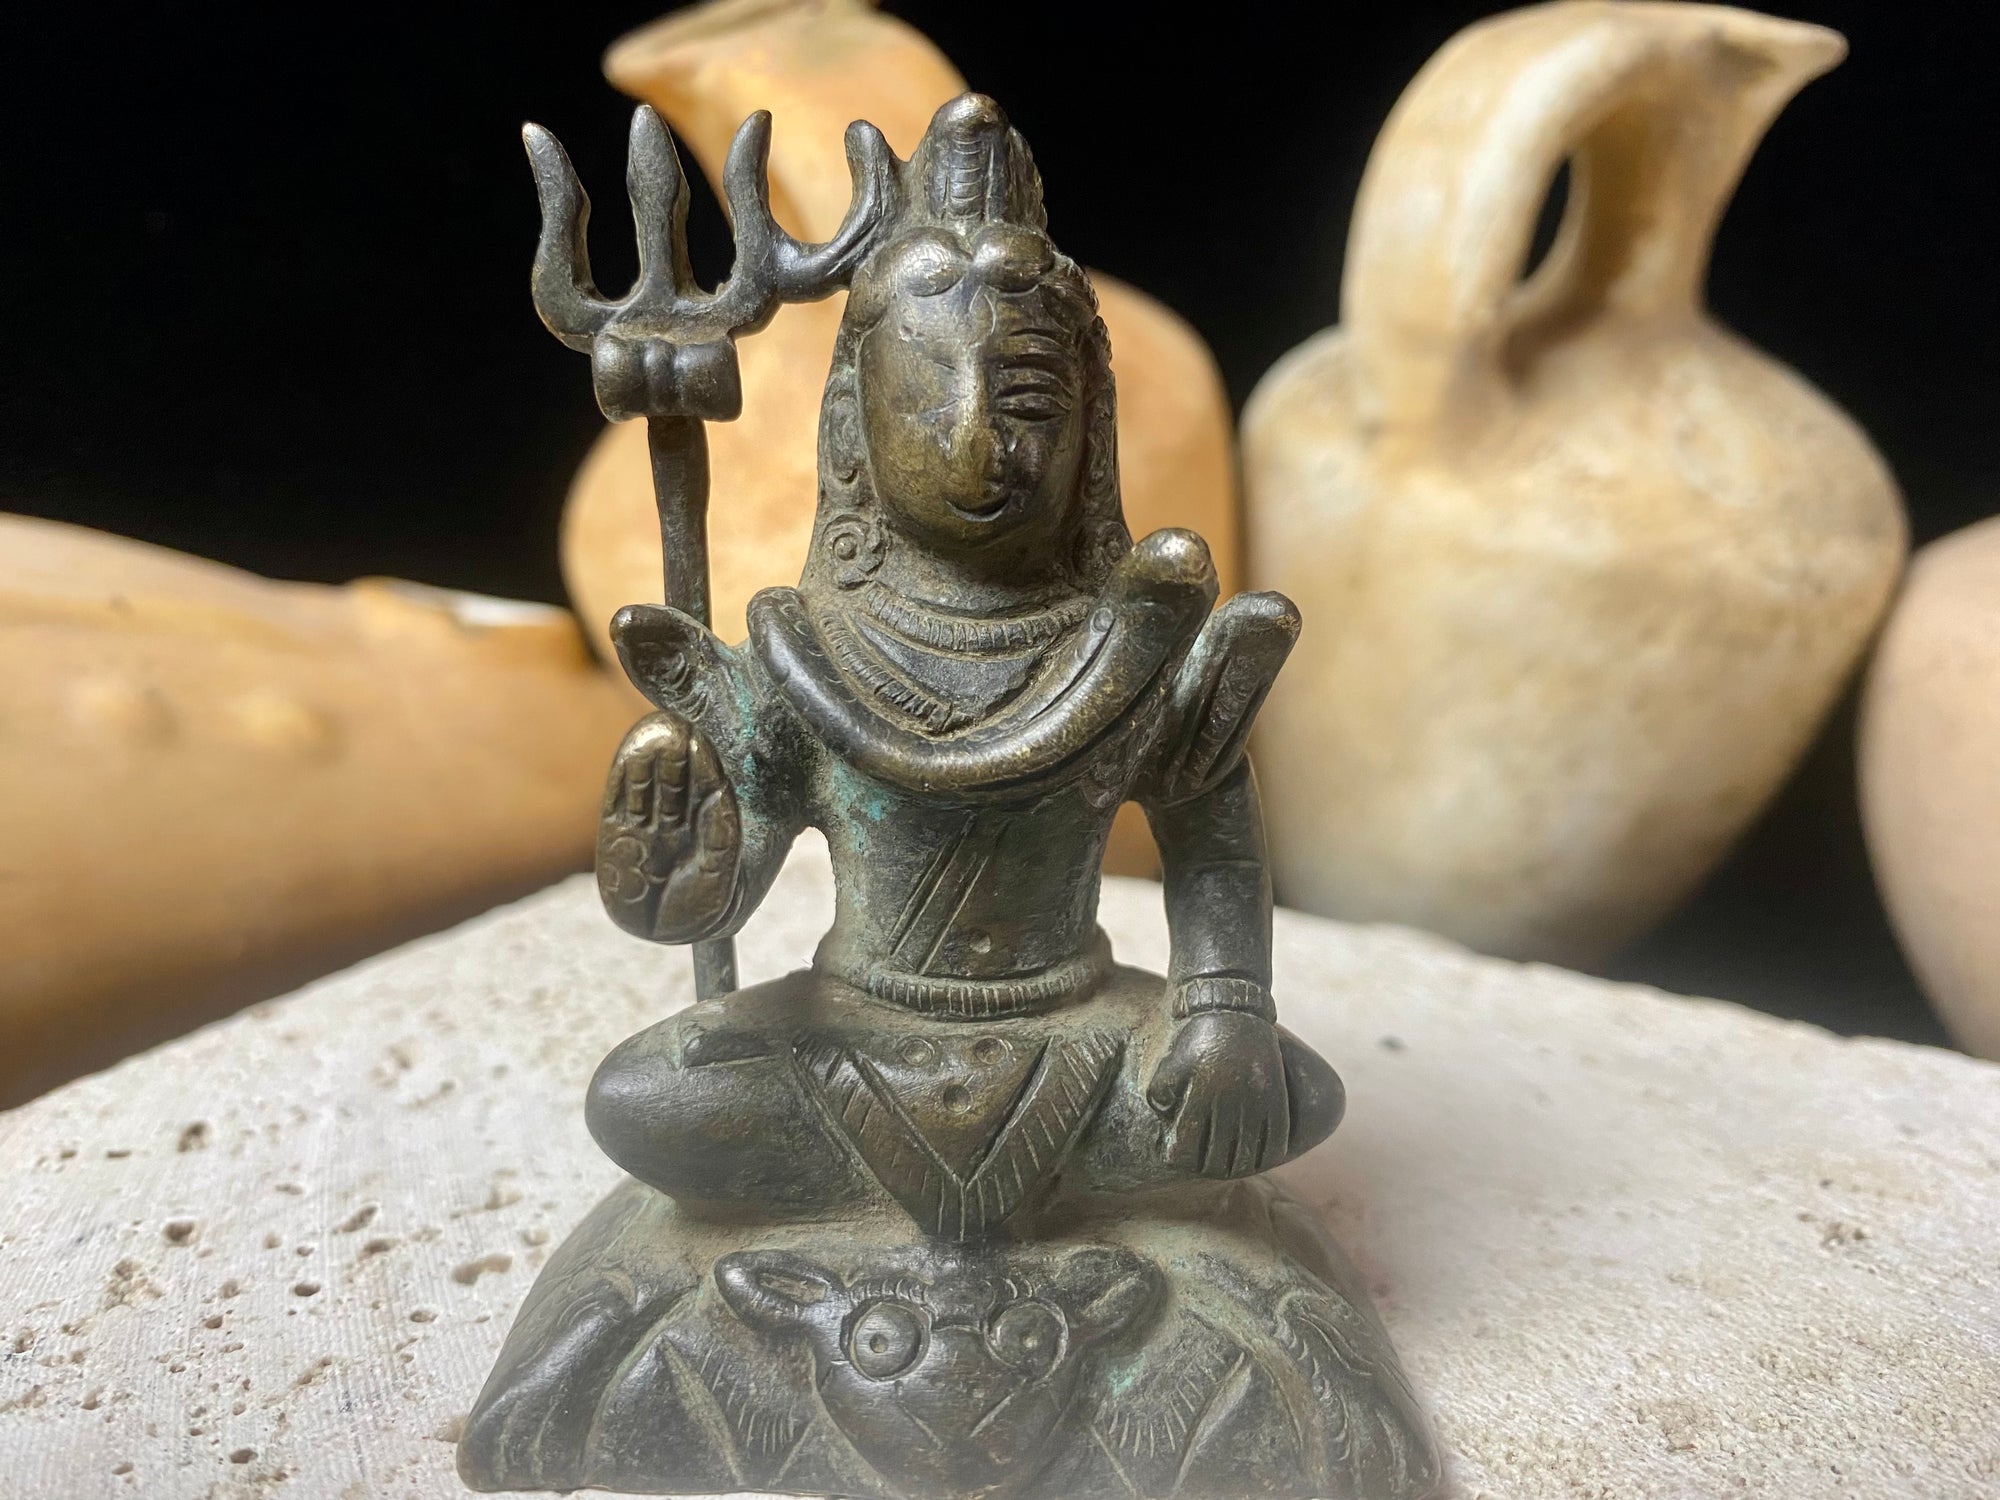 A small cast brass Shiva in serene seated style. This piece has some rubbing on the right hand side of the face and displays softened edges from decades of handling. It has a naturally darkened patina and is approximately 80 years old, or older. Gujarat, India. Measurements: Height 7.7 cm x width 5 cm x depth 3.5 cm